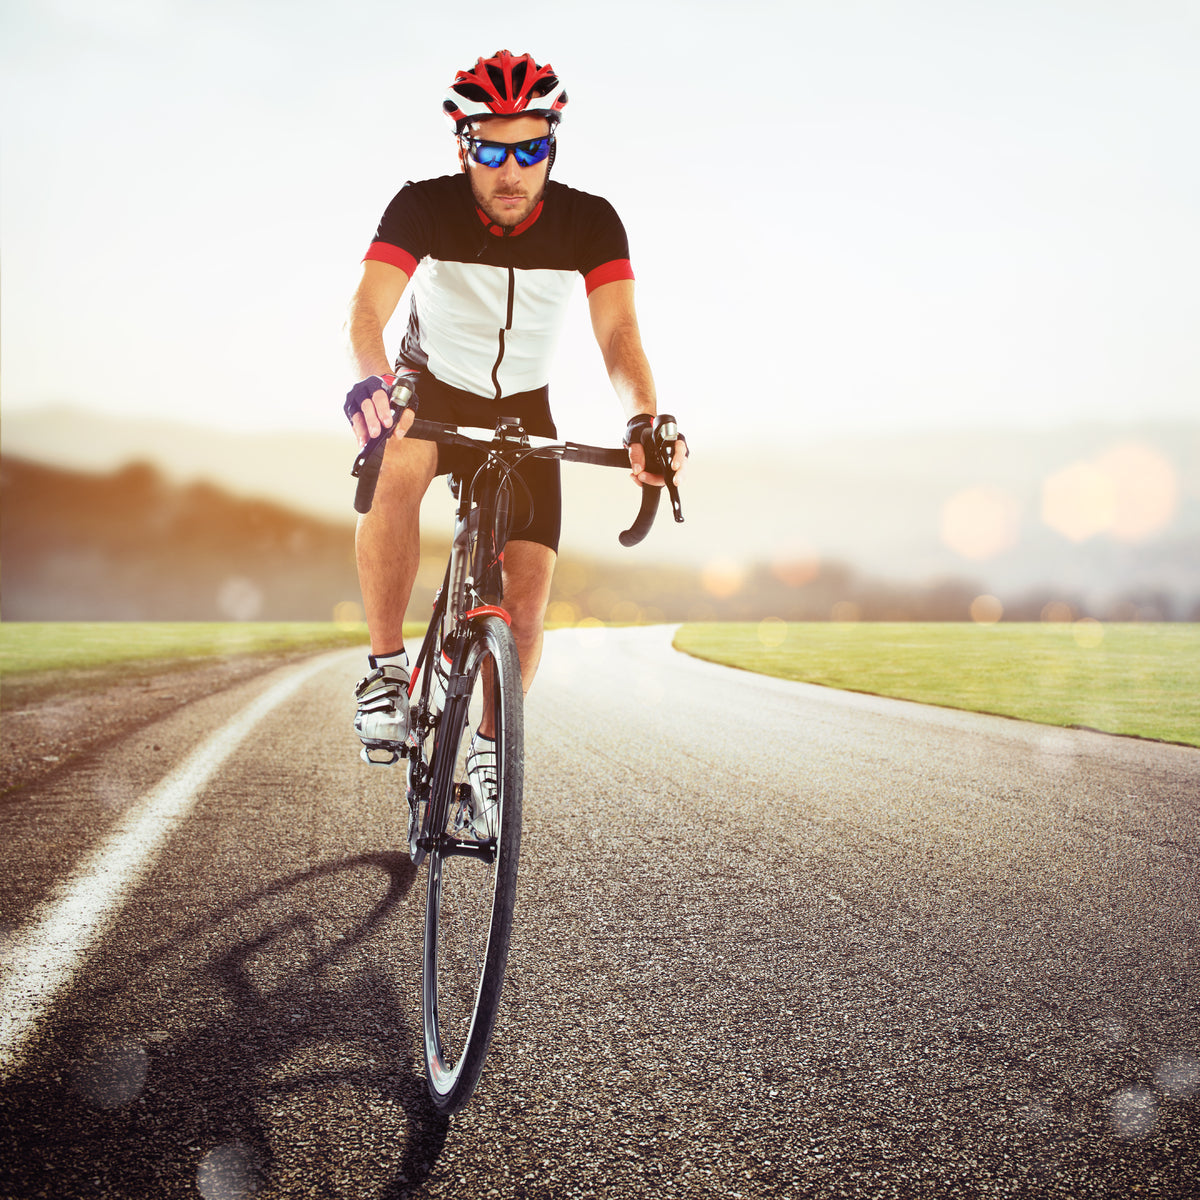 Bike Clothing: What To Ride In During The Summer